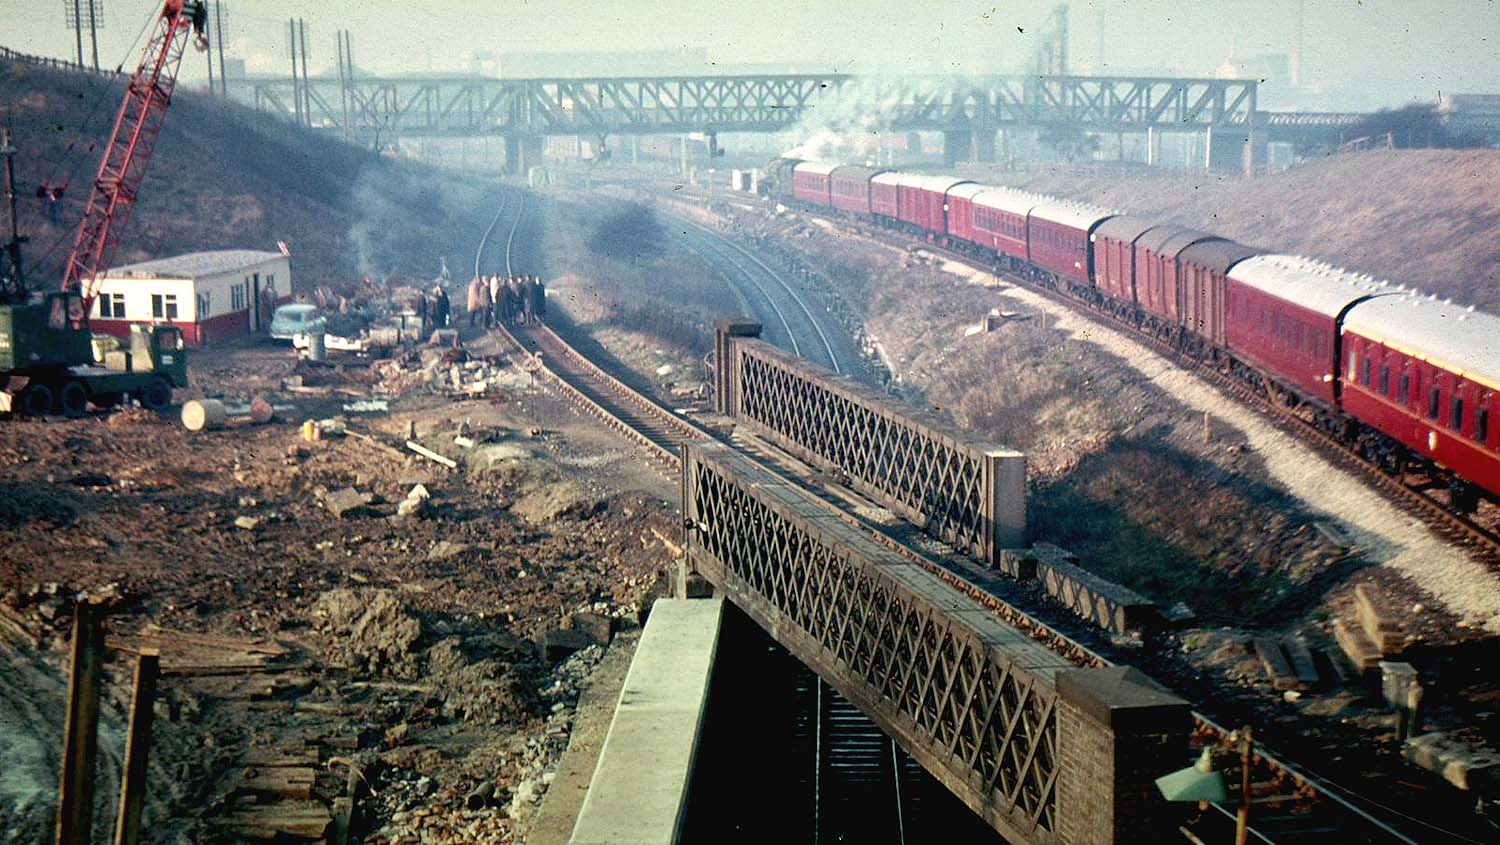 Looking towards Rugby station as the ex-LMS Coronation Class locomotive approaches the Great Central bridge